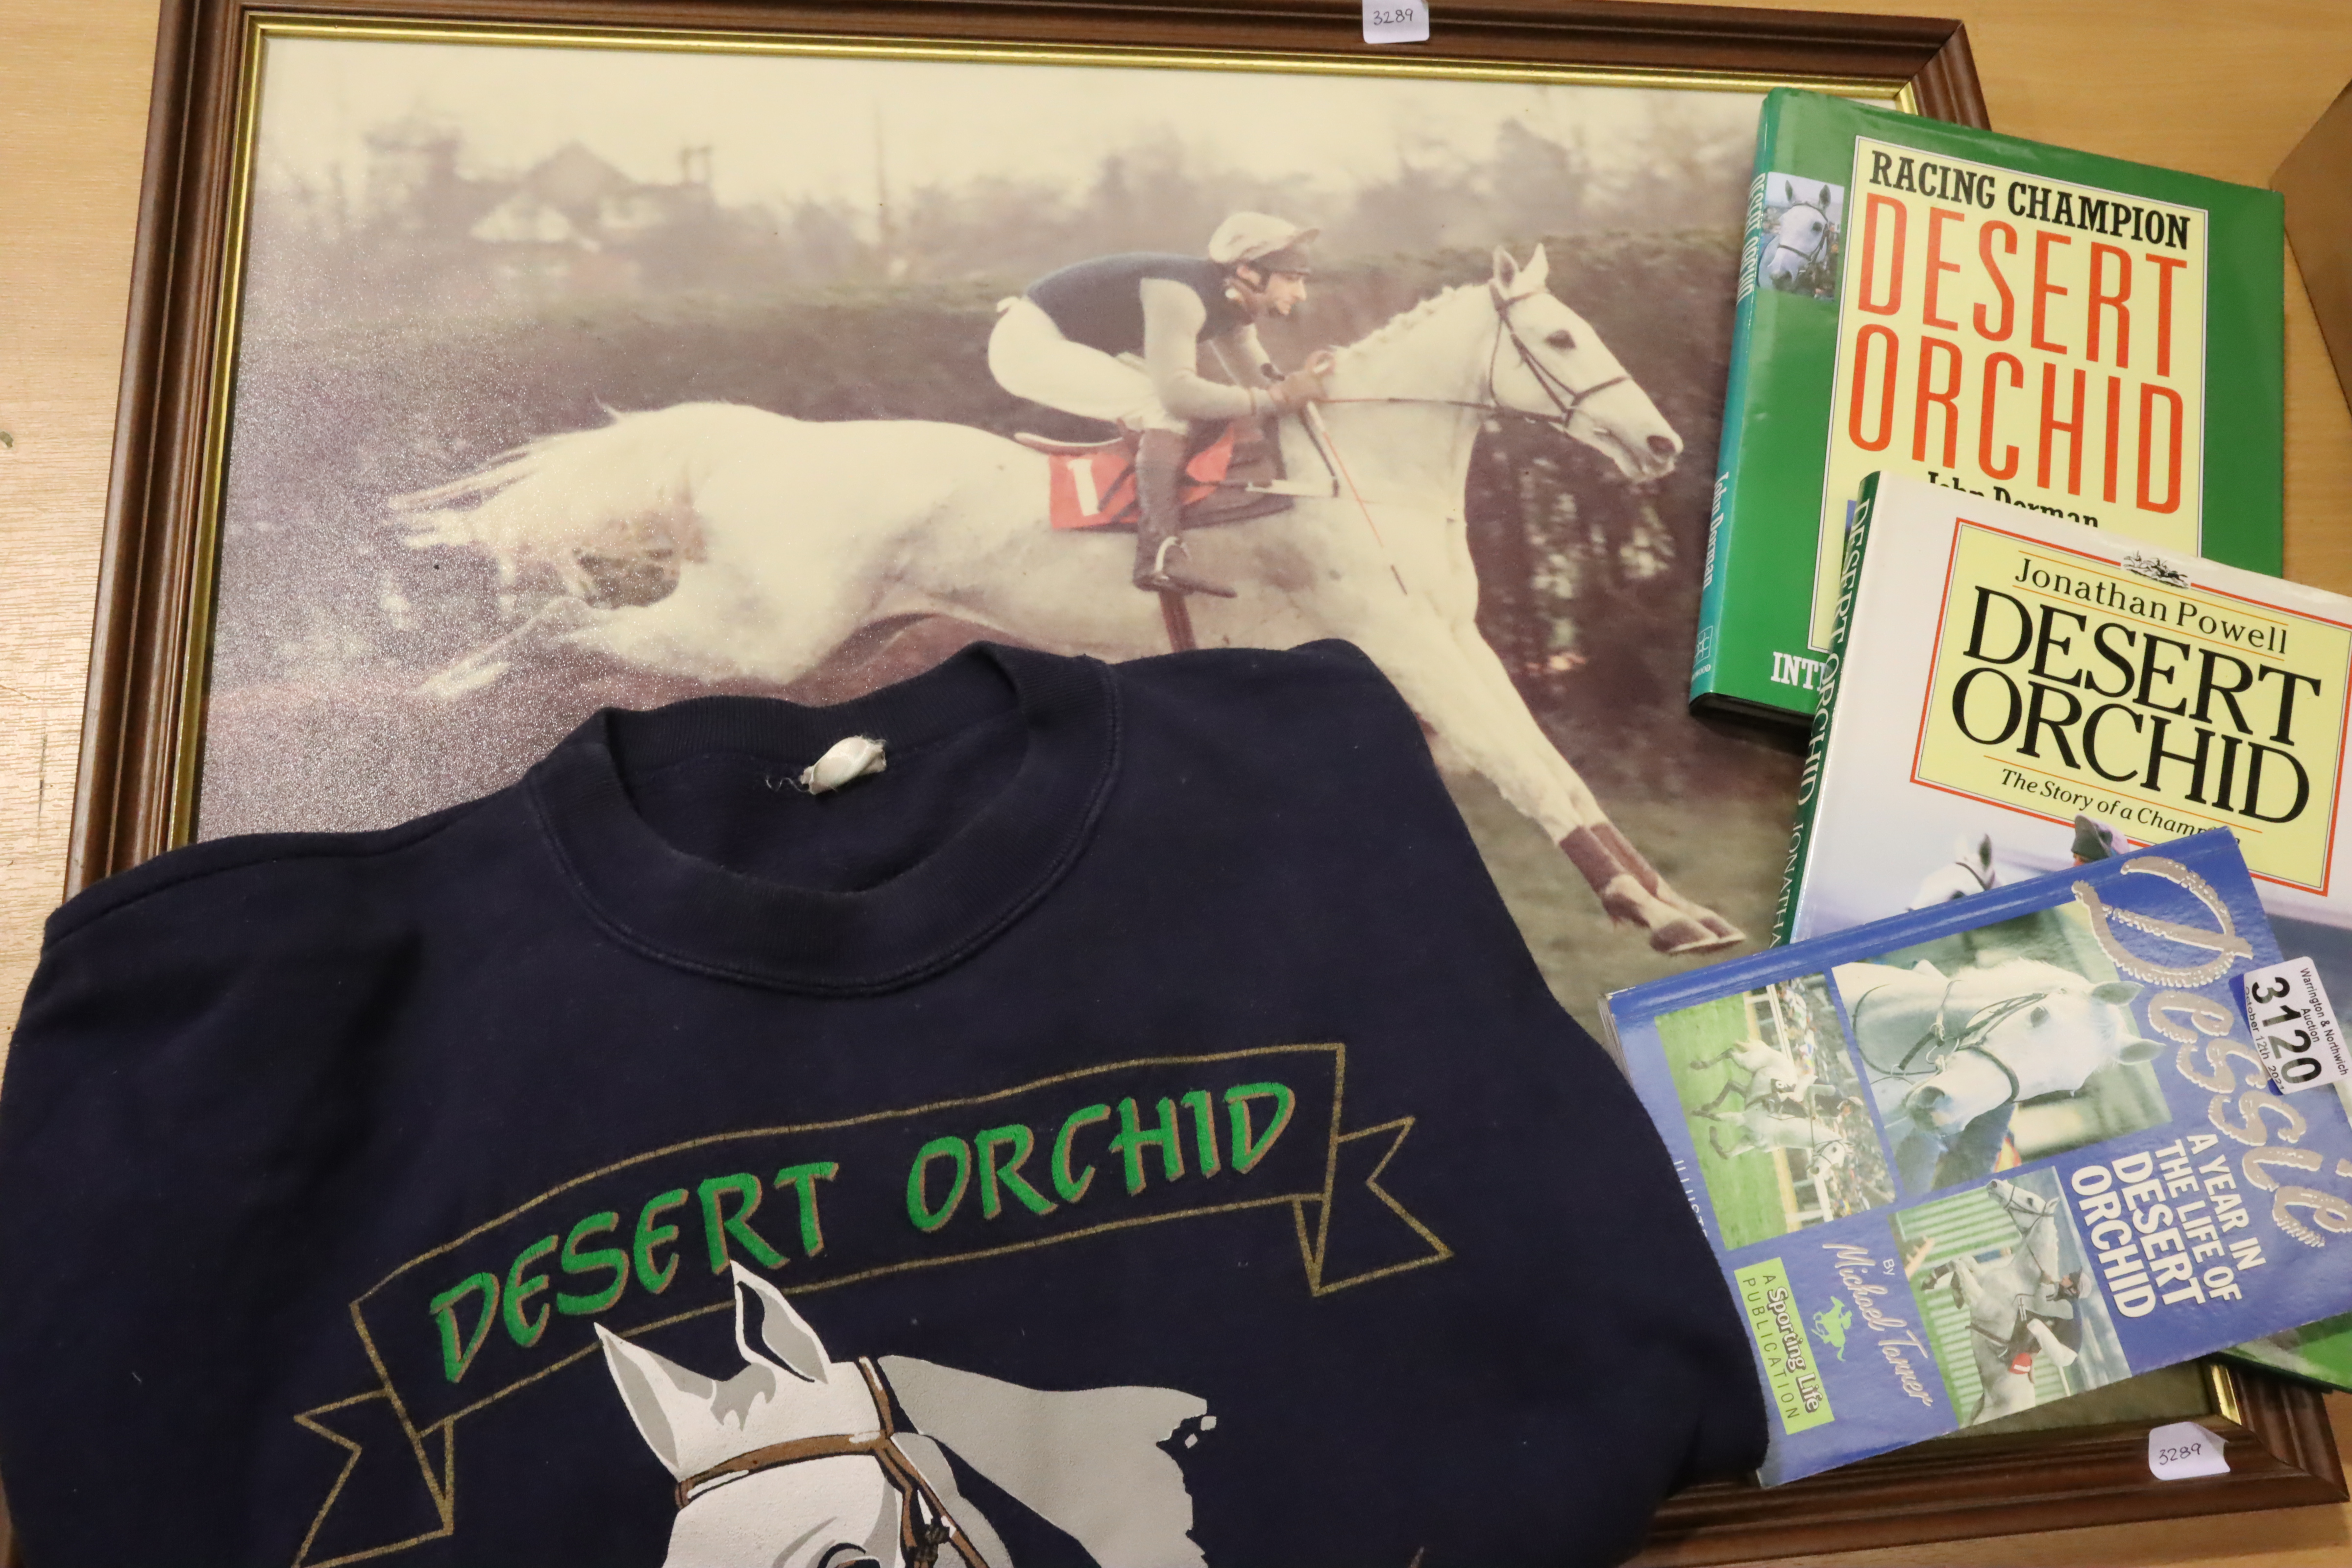 Simon Sherwood on desert orchid, a 1989 double signed publicity shot, framed, with jockeys sweater